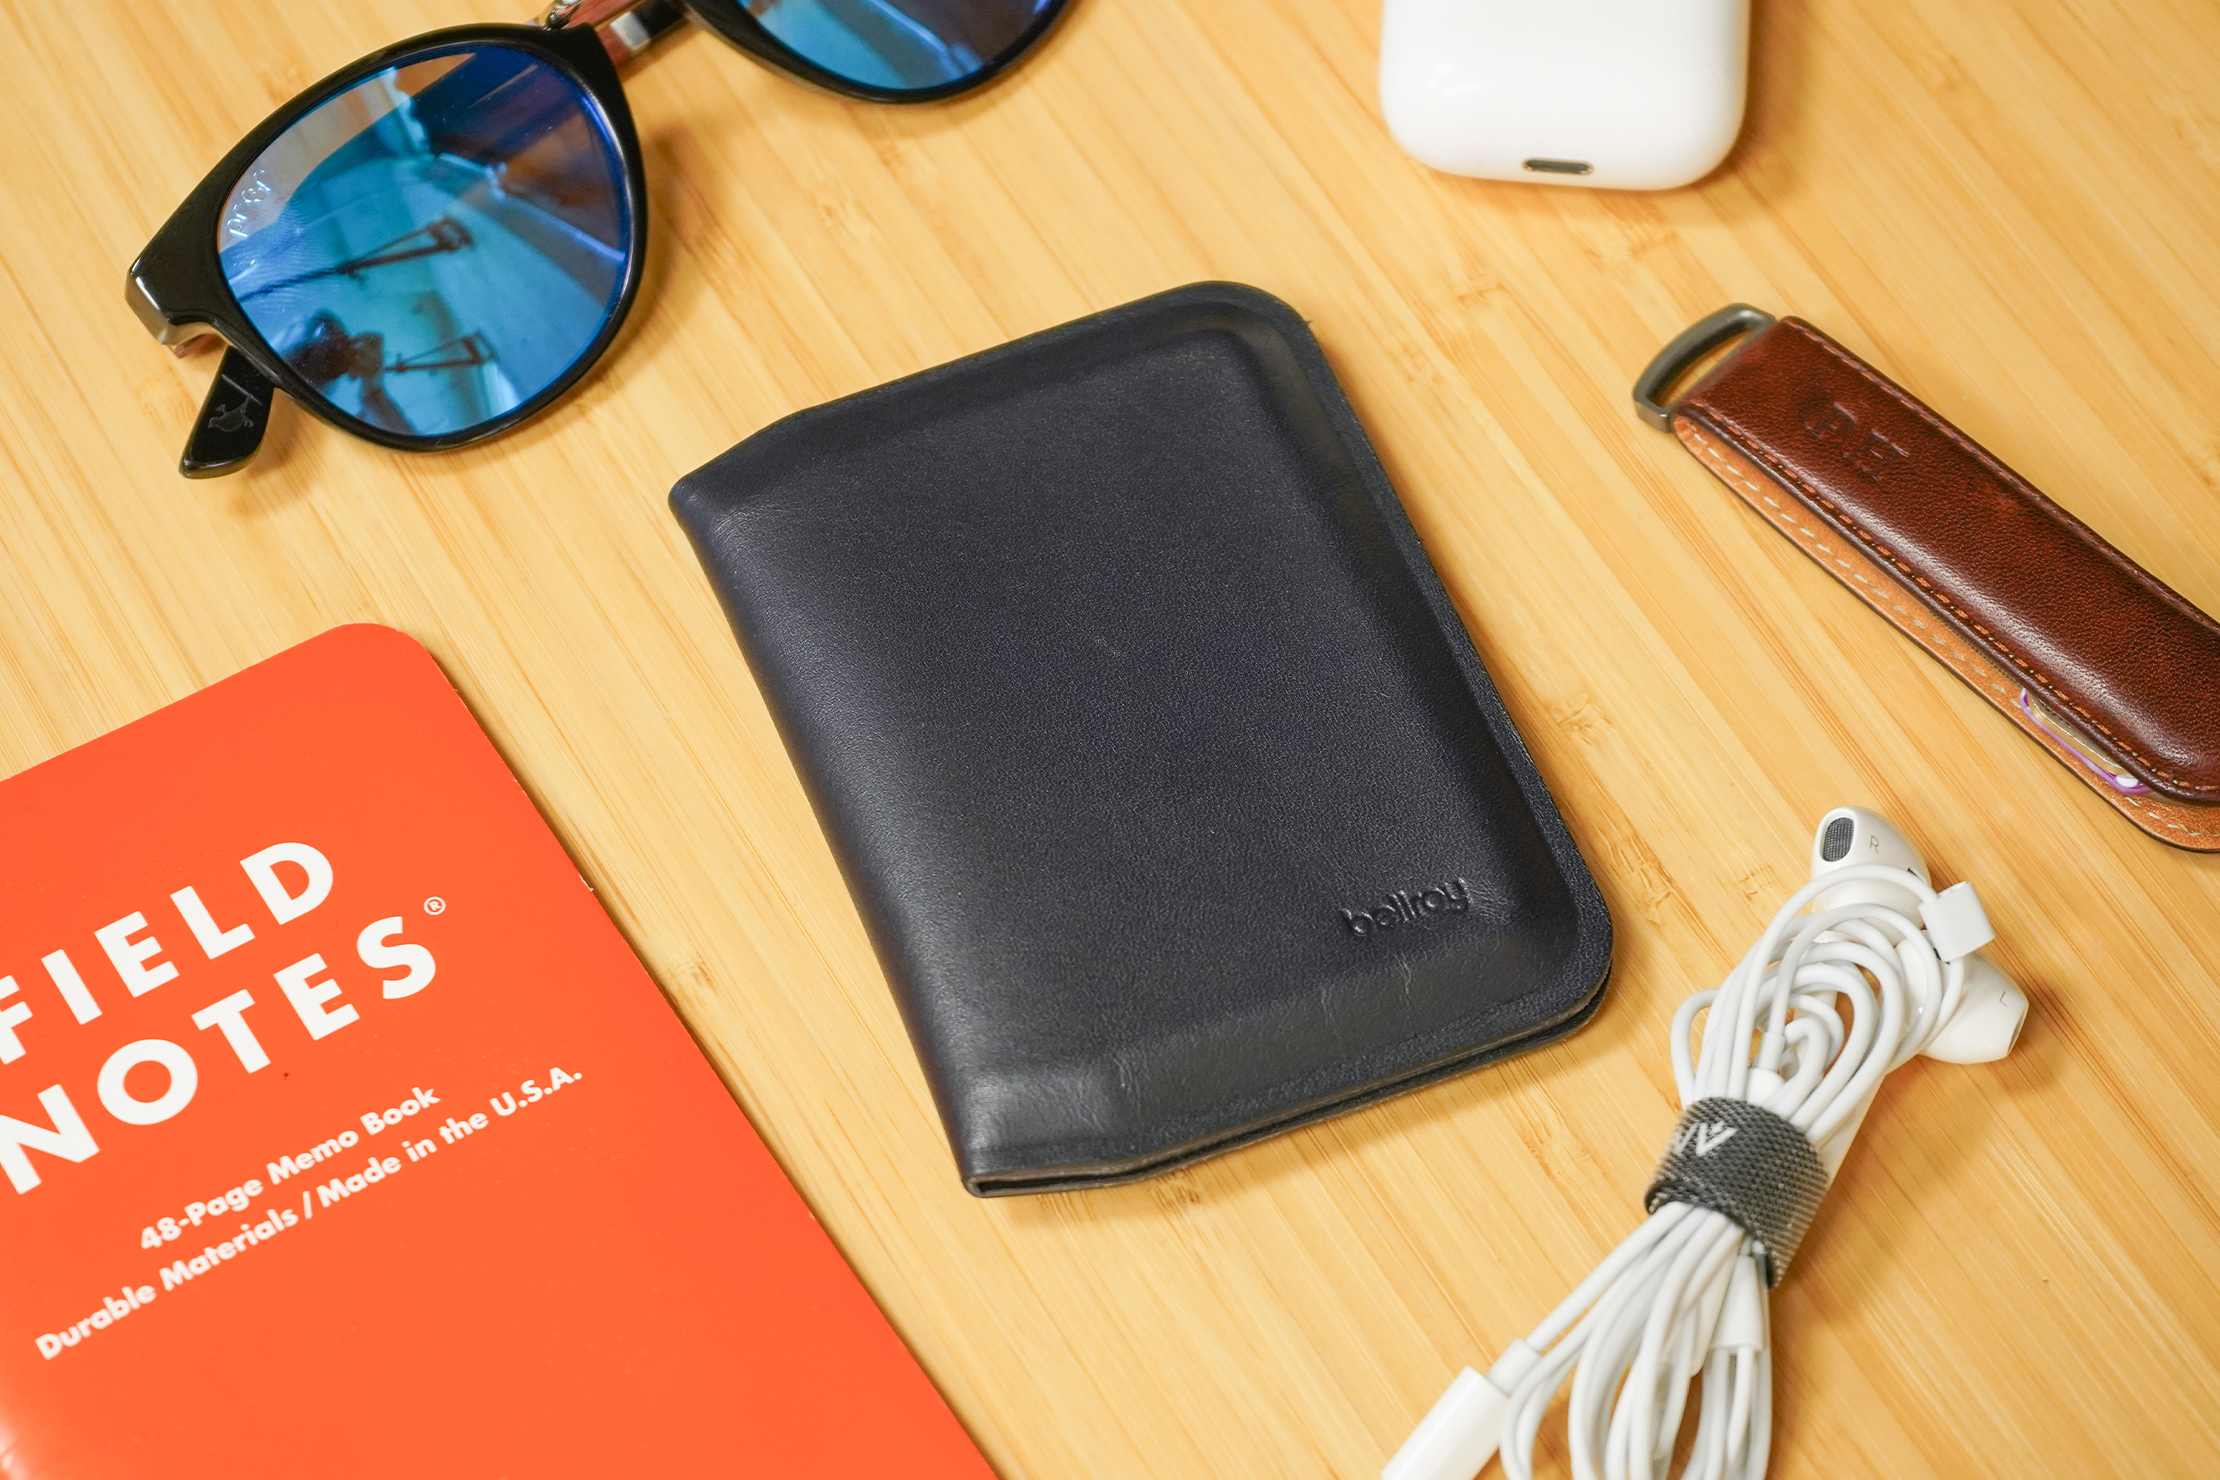 Bellroy Premium Wallet Review after owning a previous Bellroy for